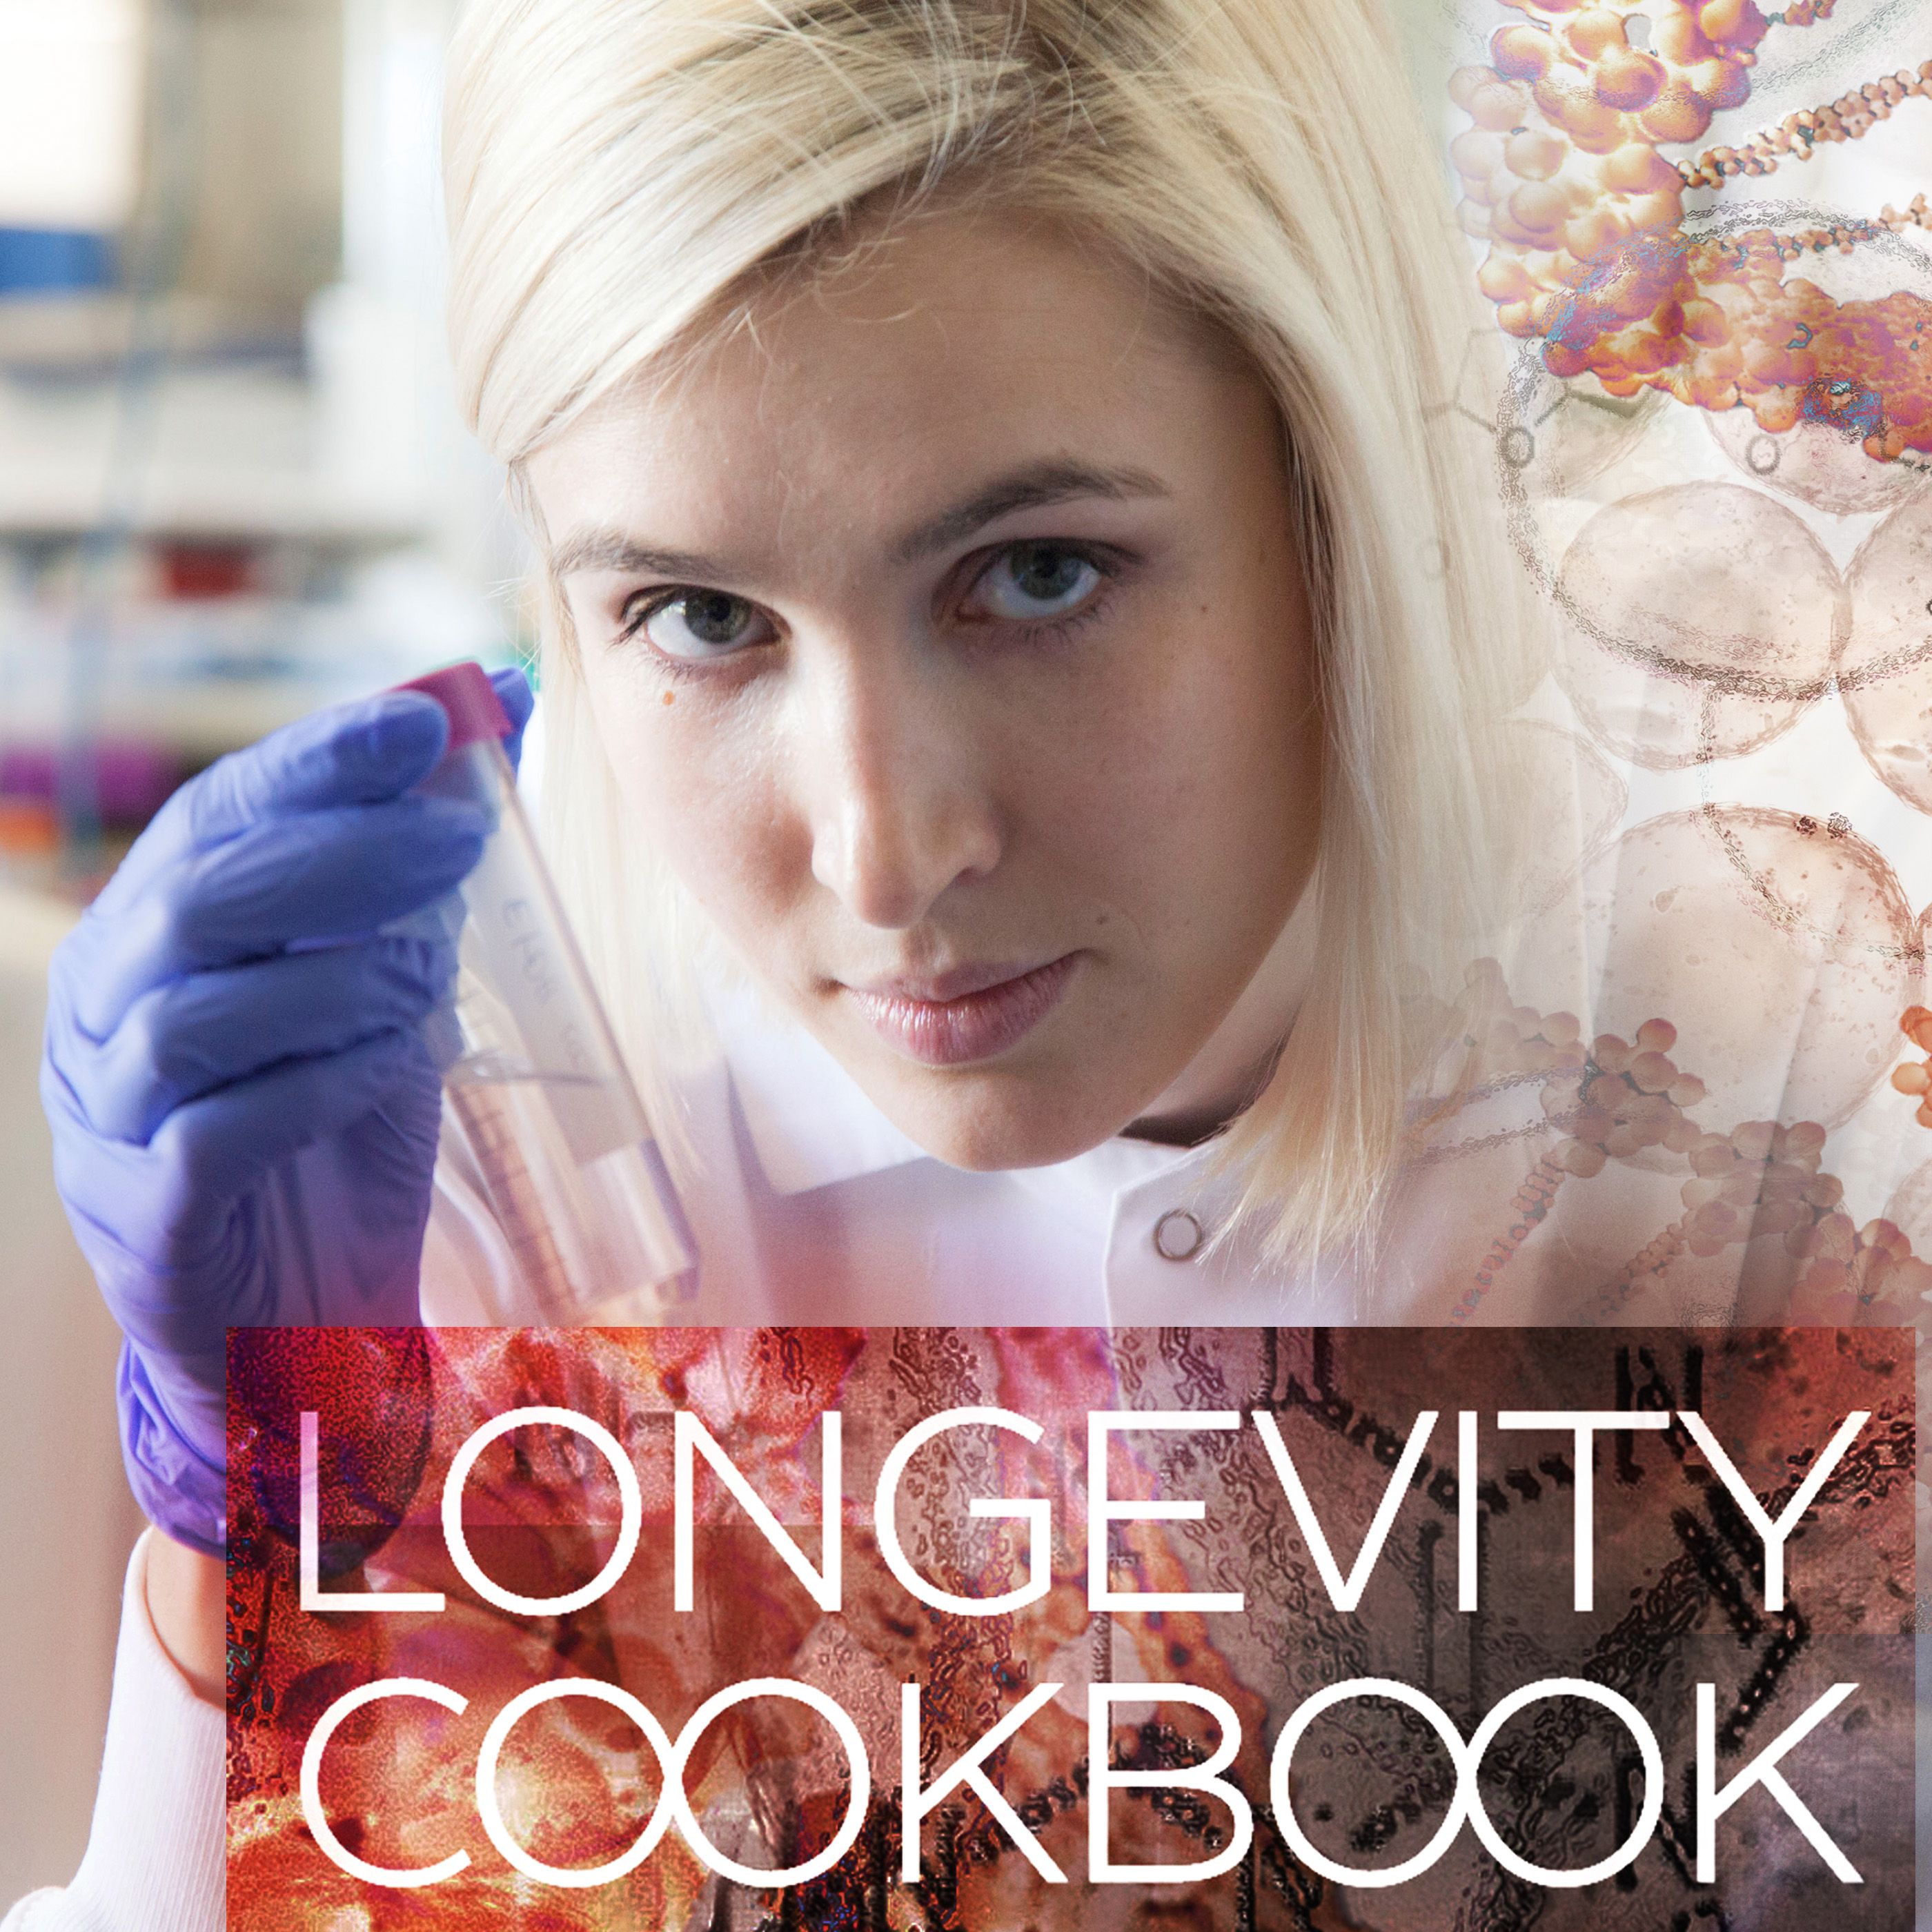 Longevity Cookbook Indiegogo Campaign Is the Most Effective Step You .